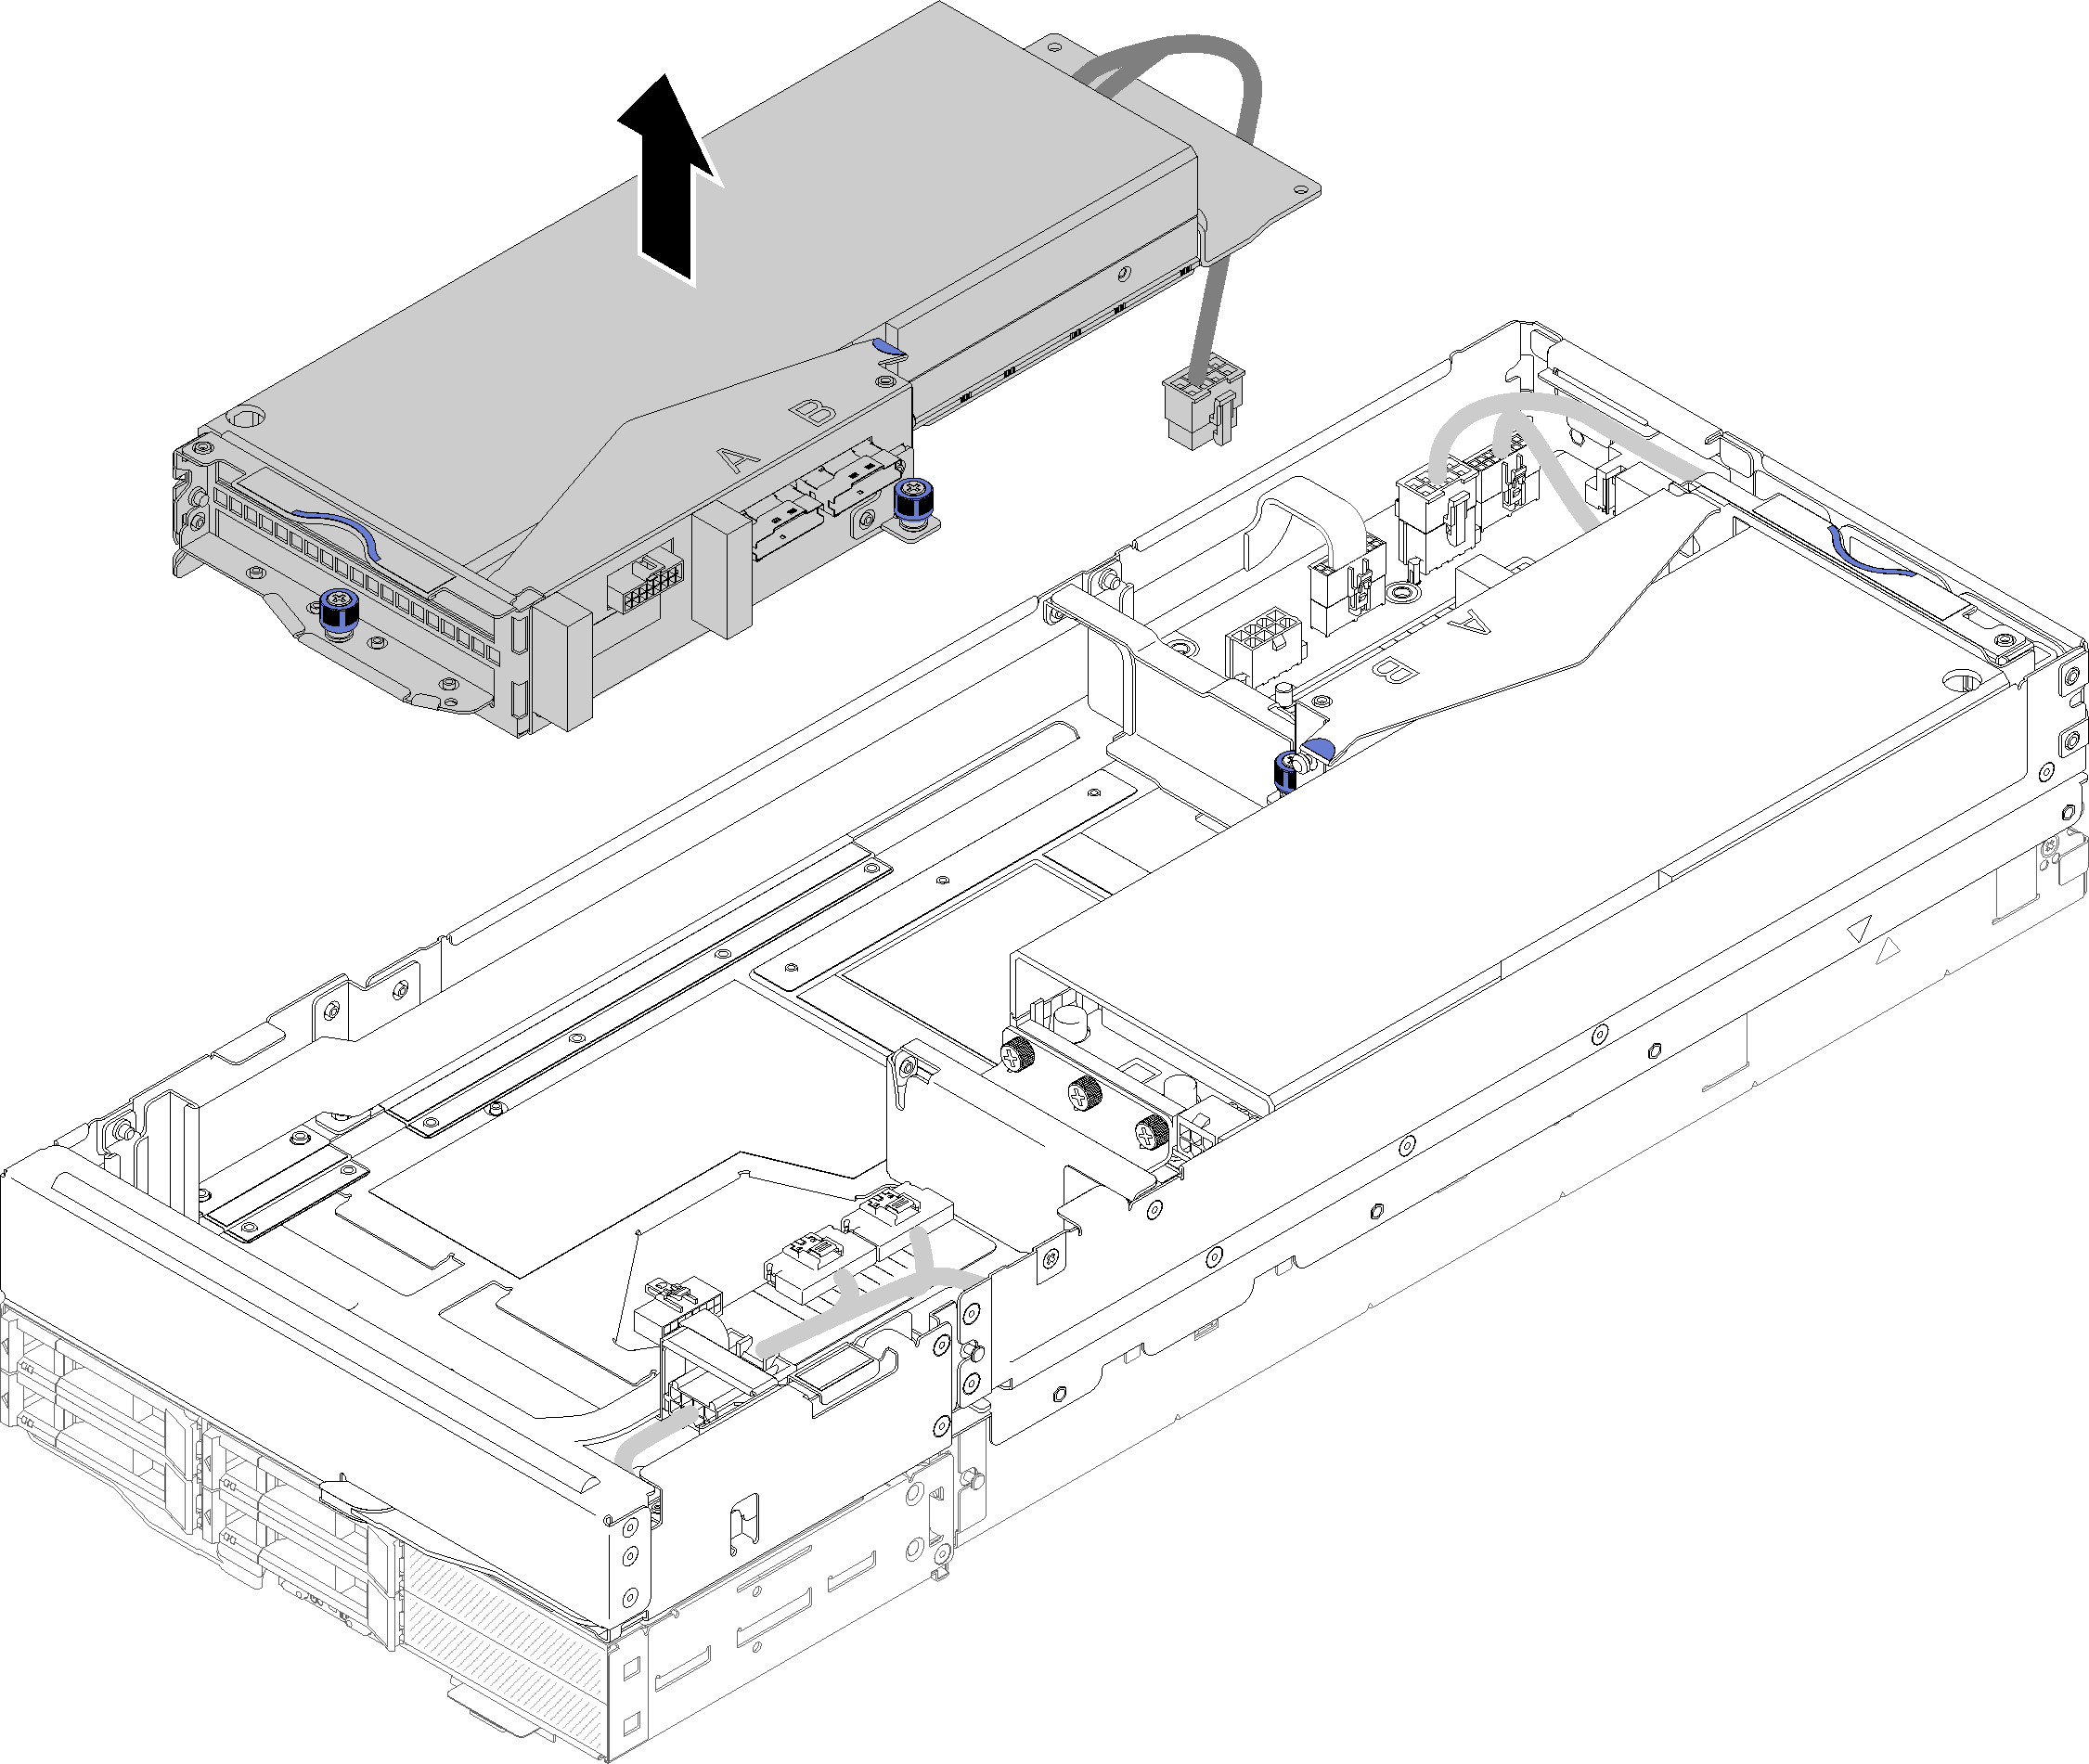 Removing the front riser assembly from the expansion node